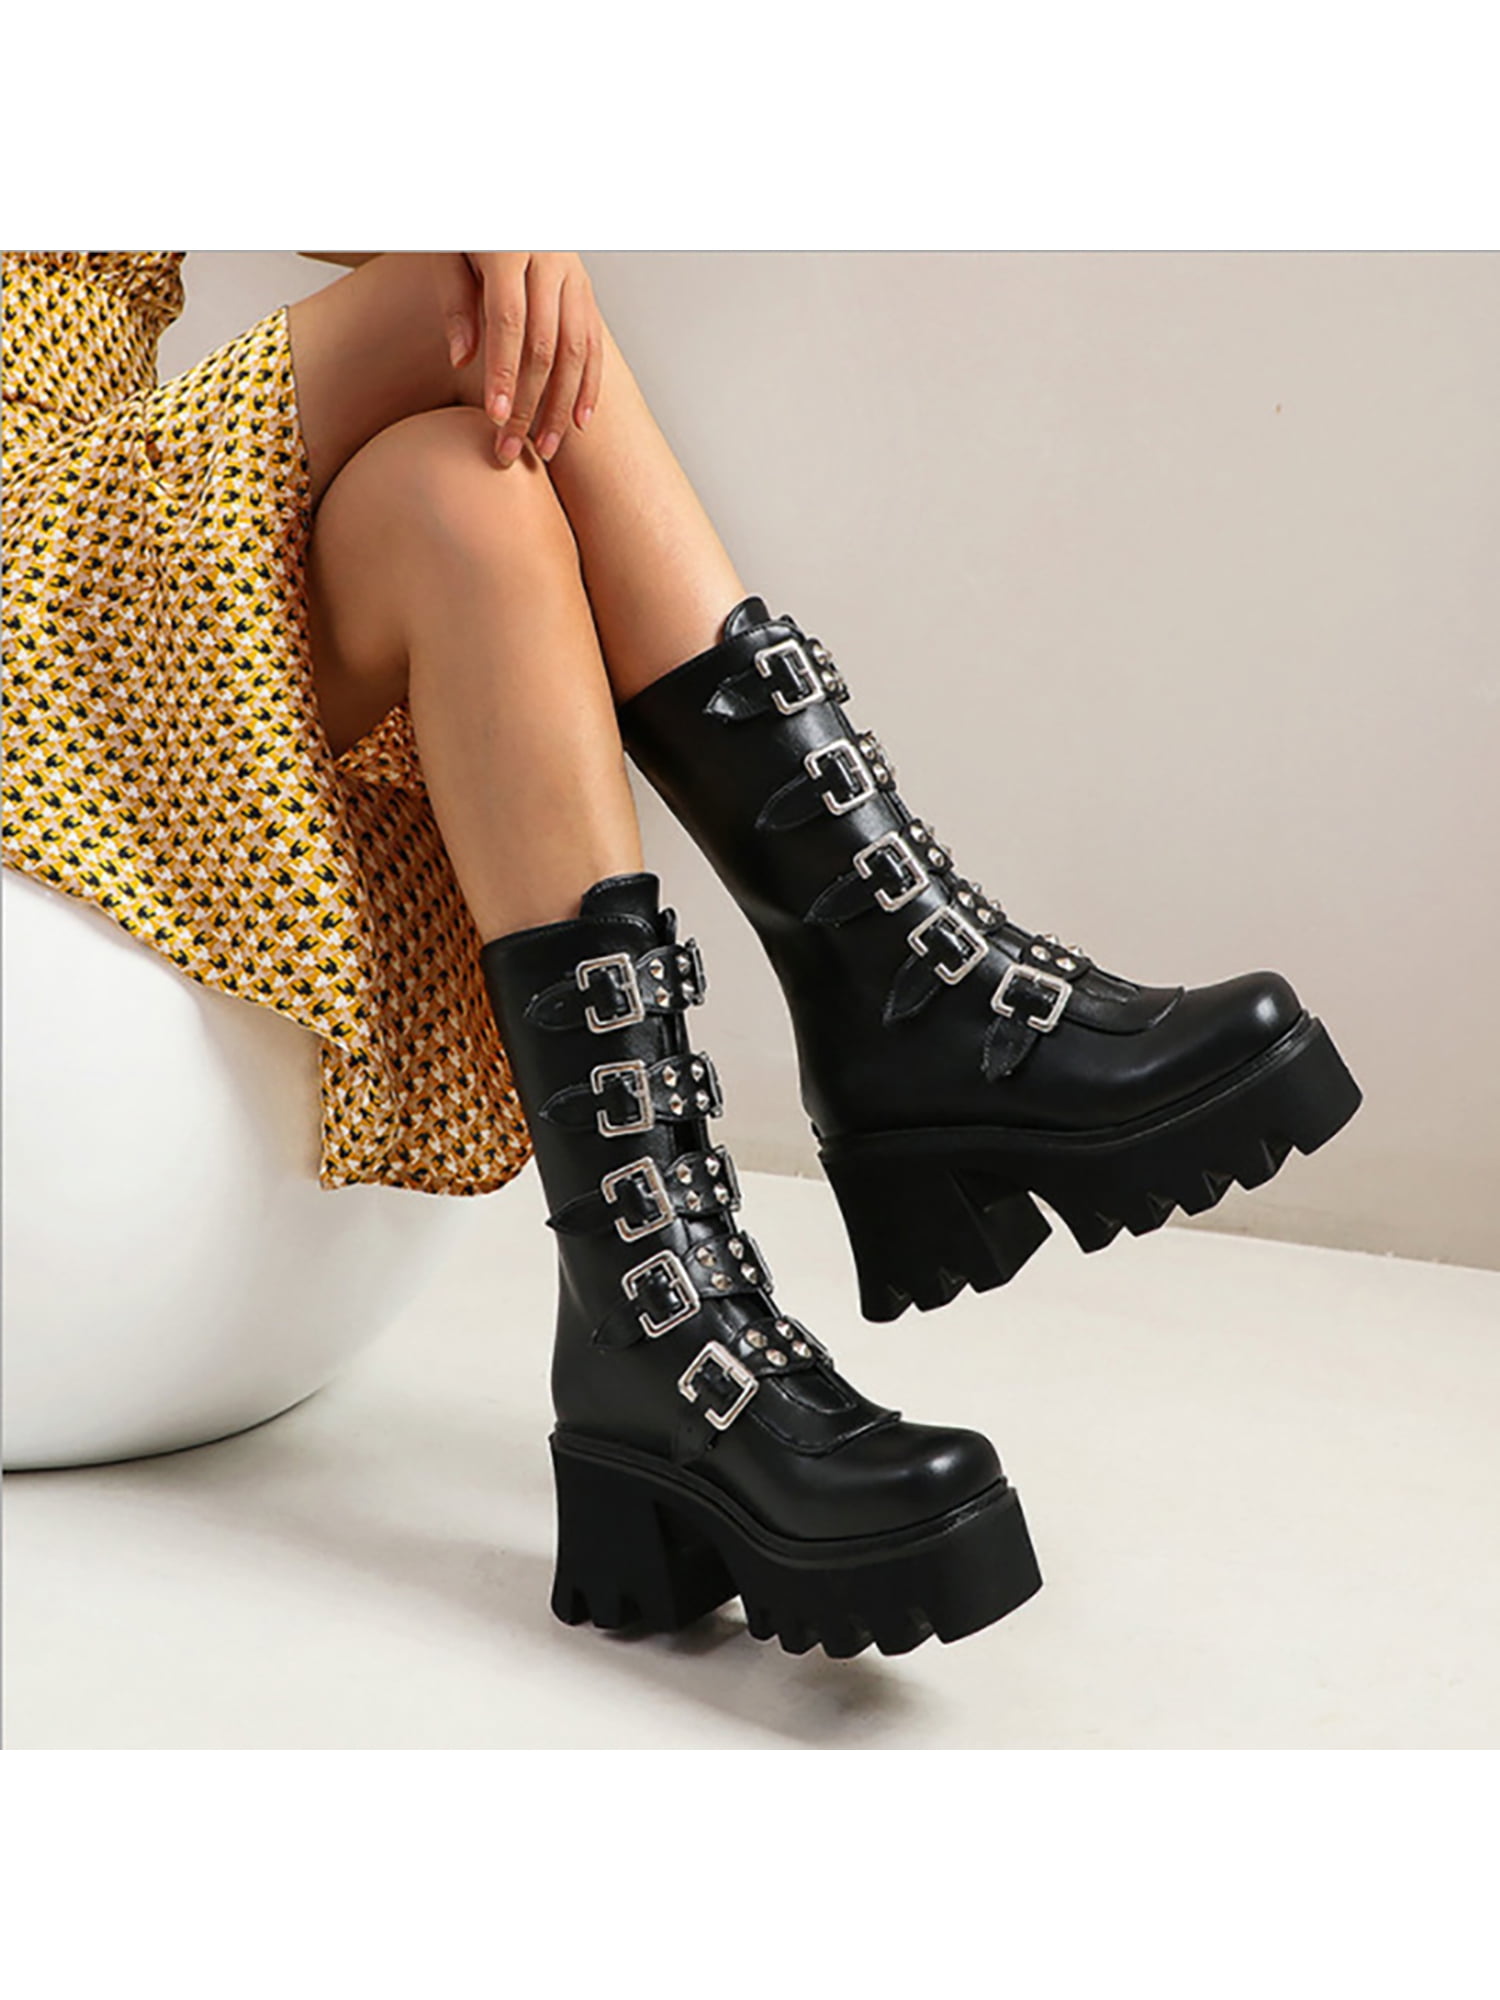 New Womens Pu Leather Knee High Boots Riding Biker Belt Buckle Boots Fashion